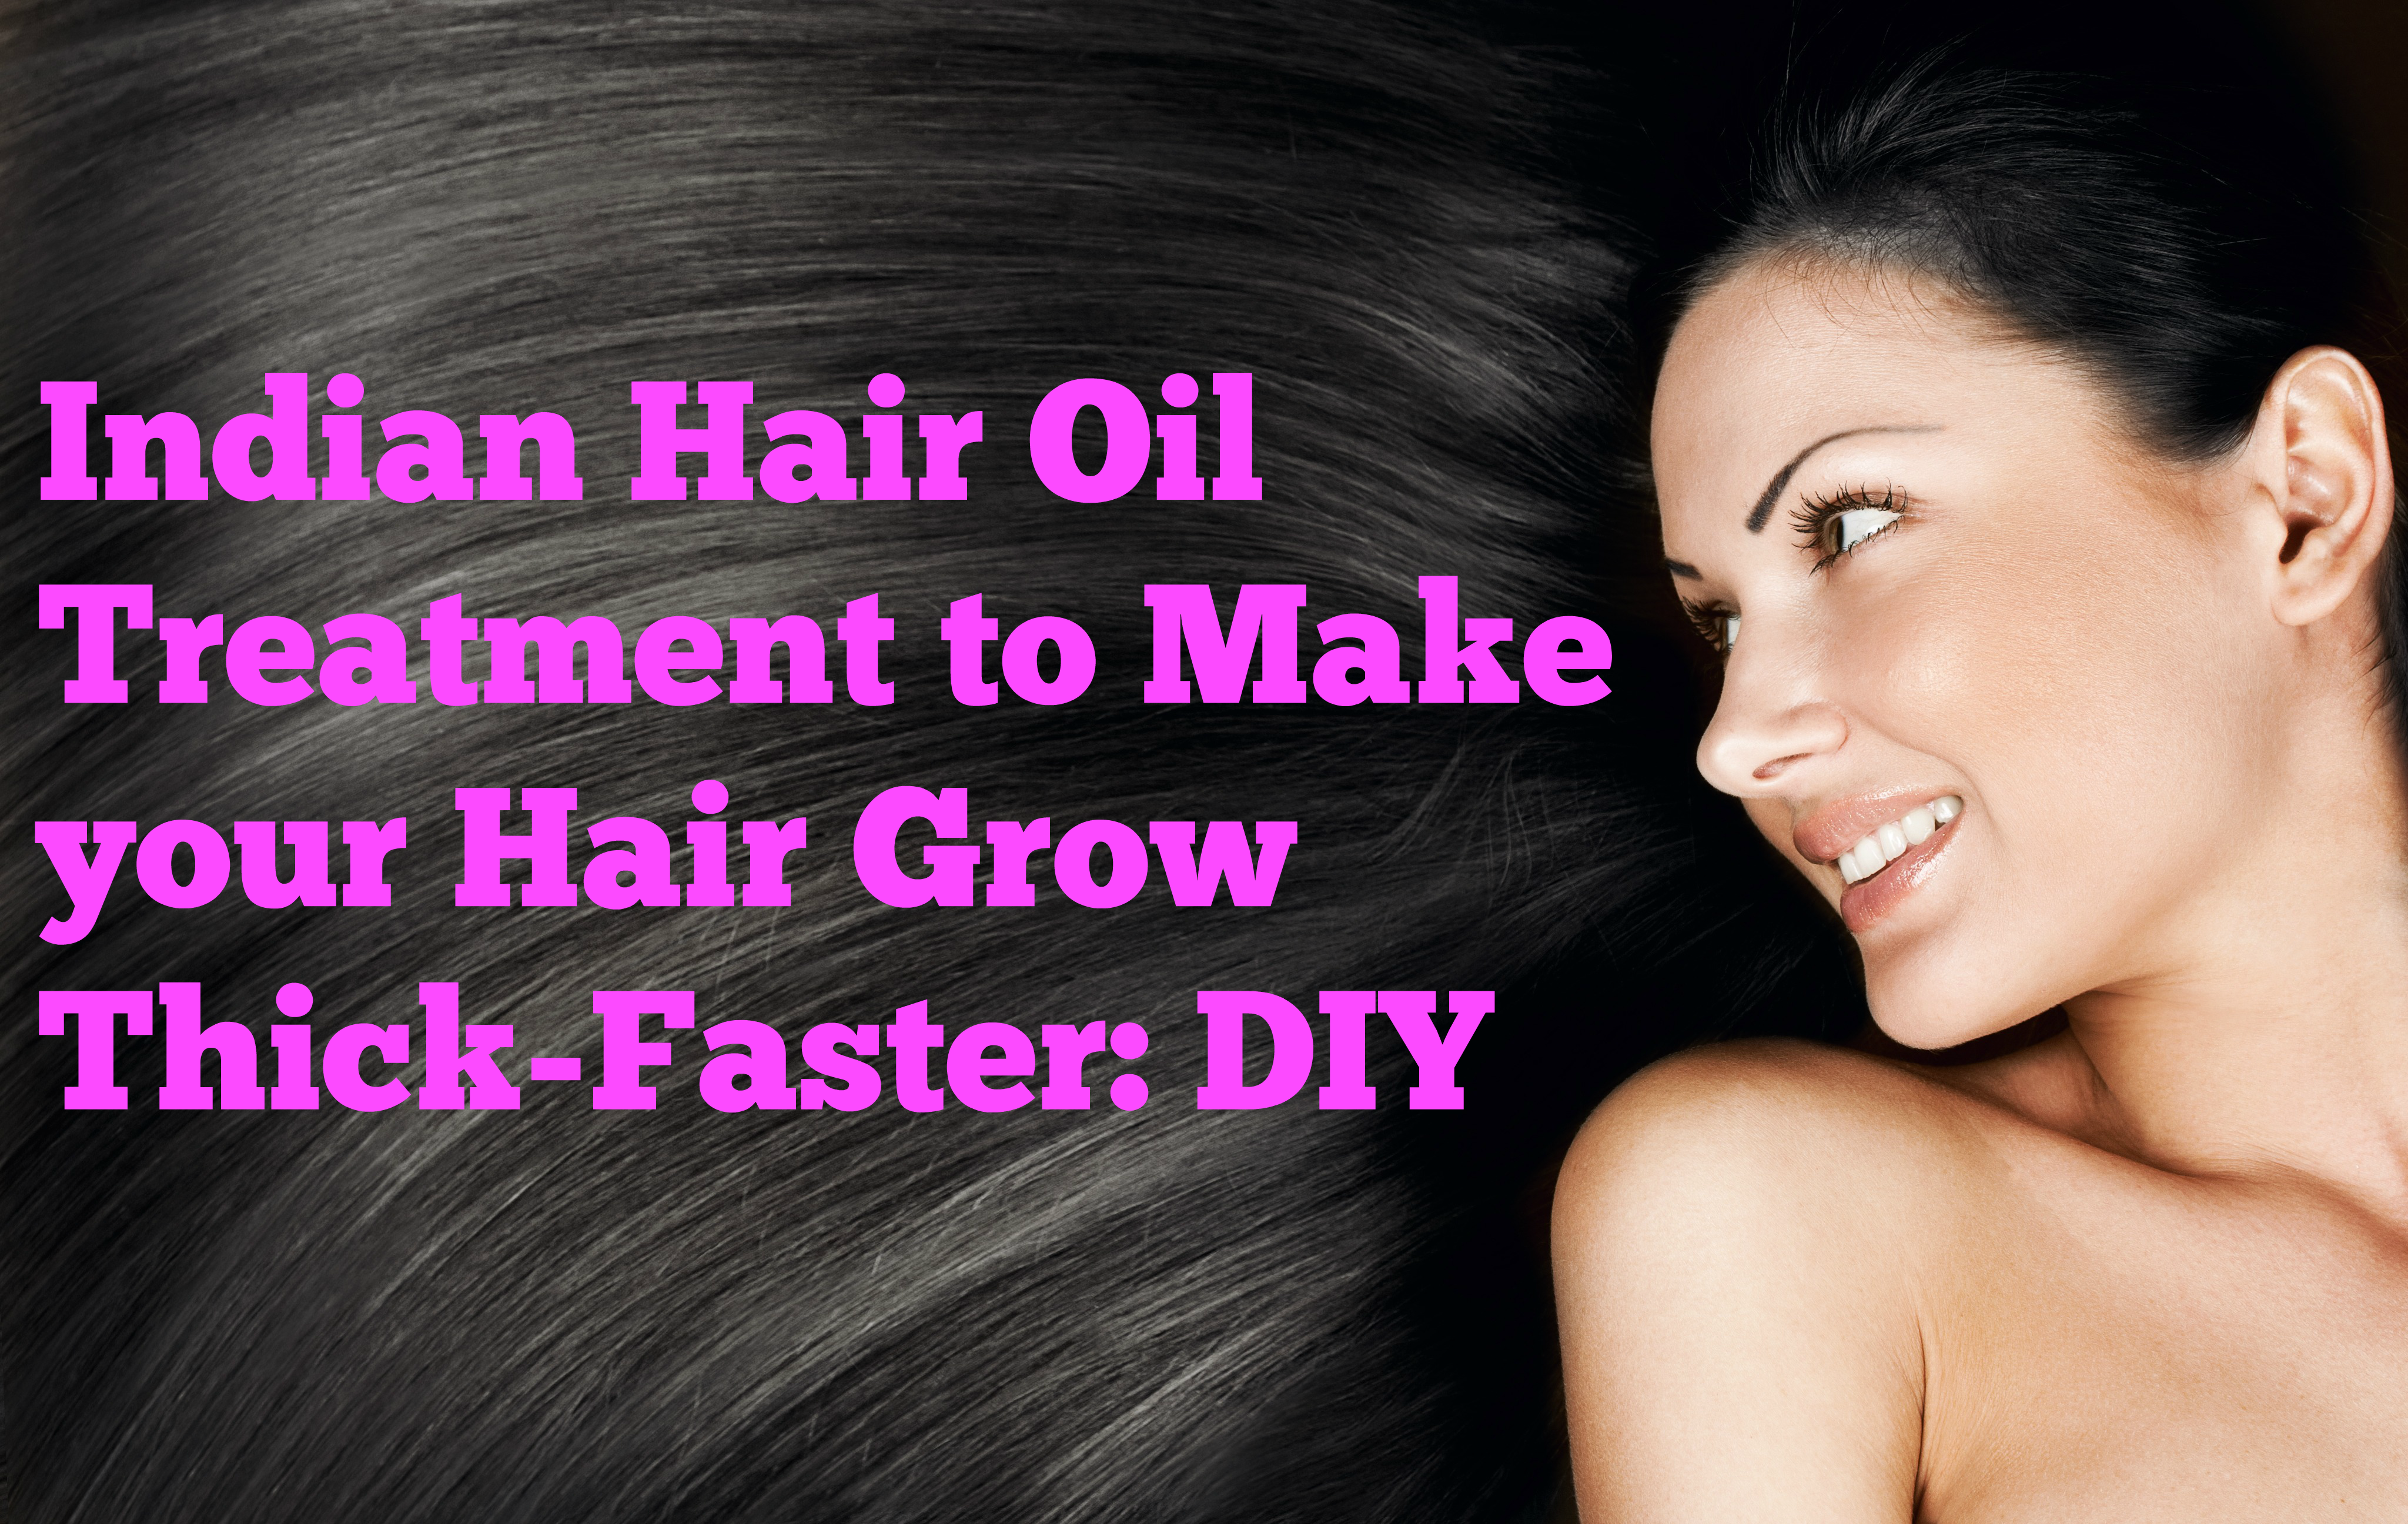 Indian Hair Oil Treatment to Make your Hair Grow Thick-Faster: DIY - Beauty  and Blush